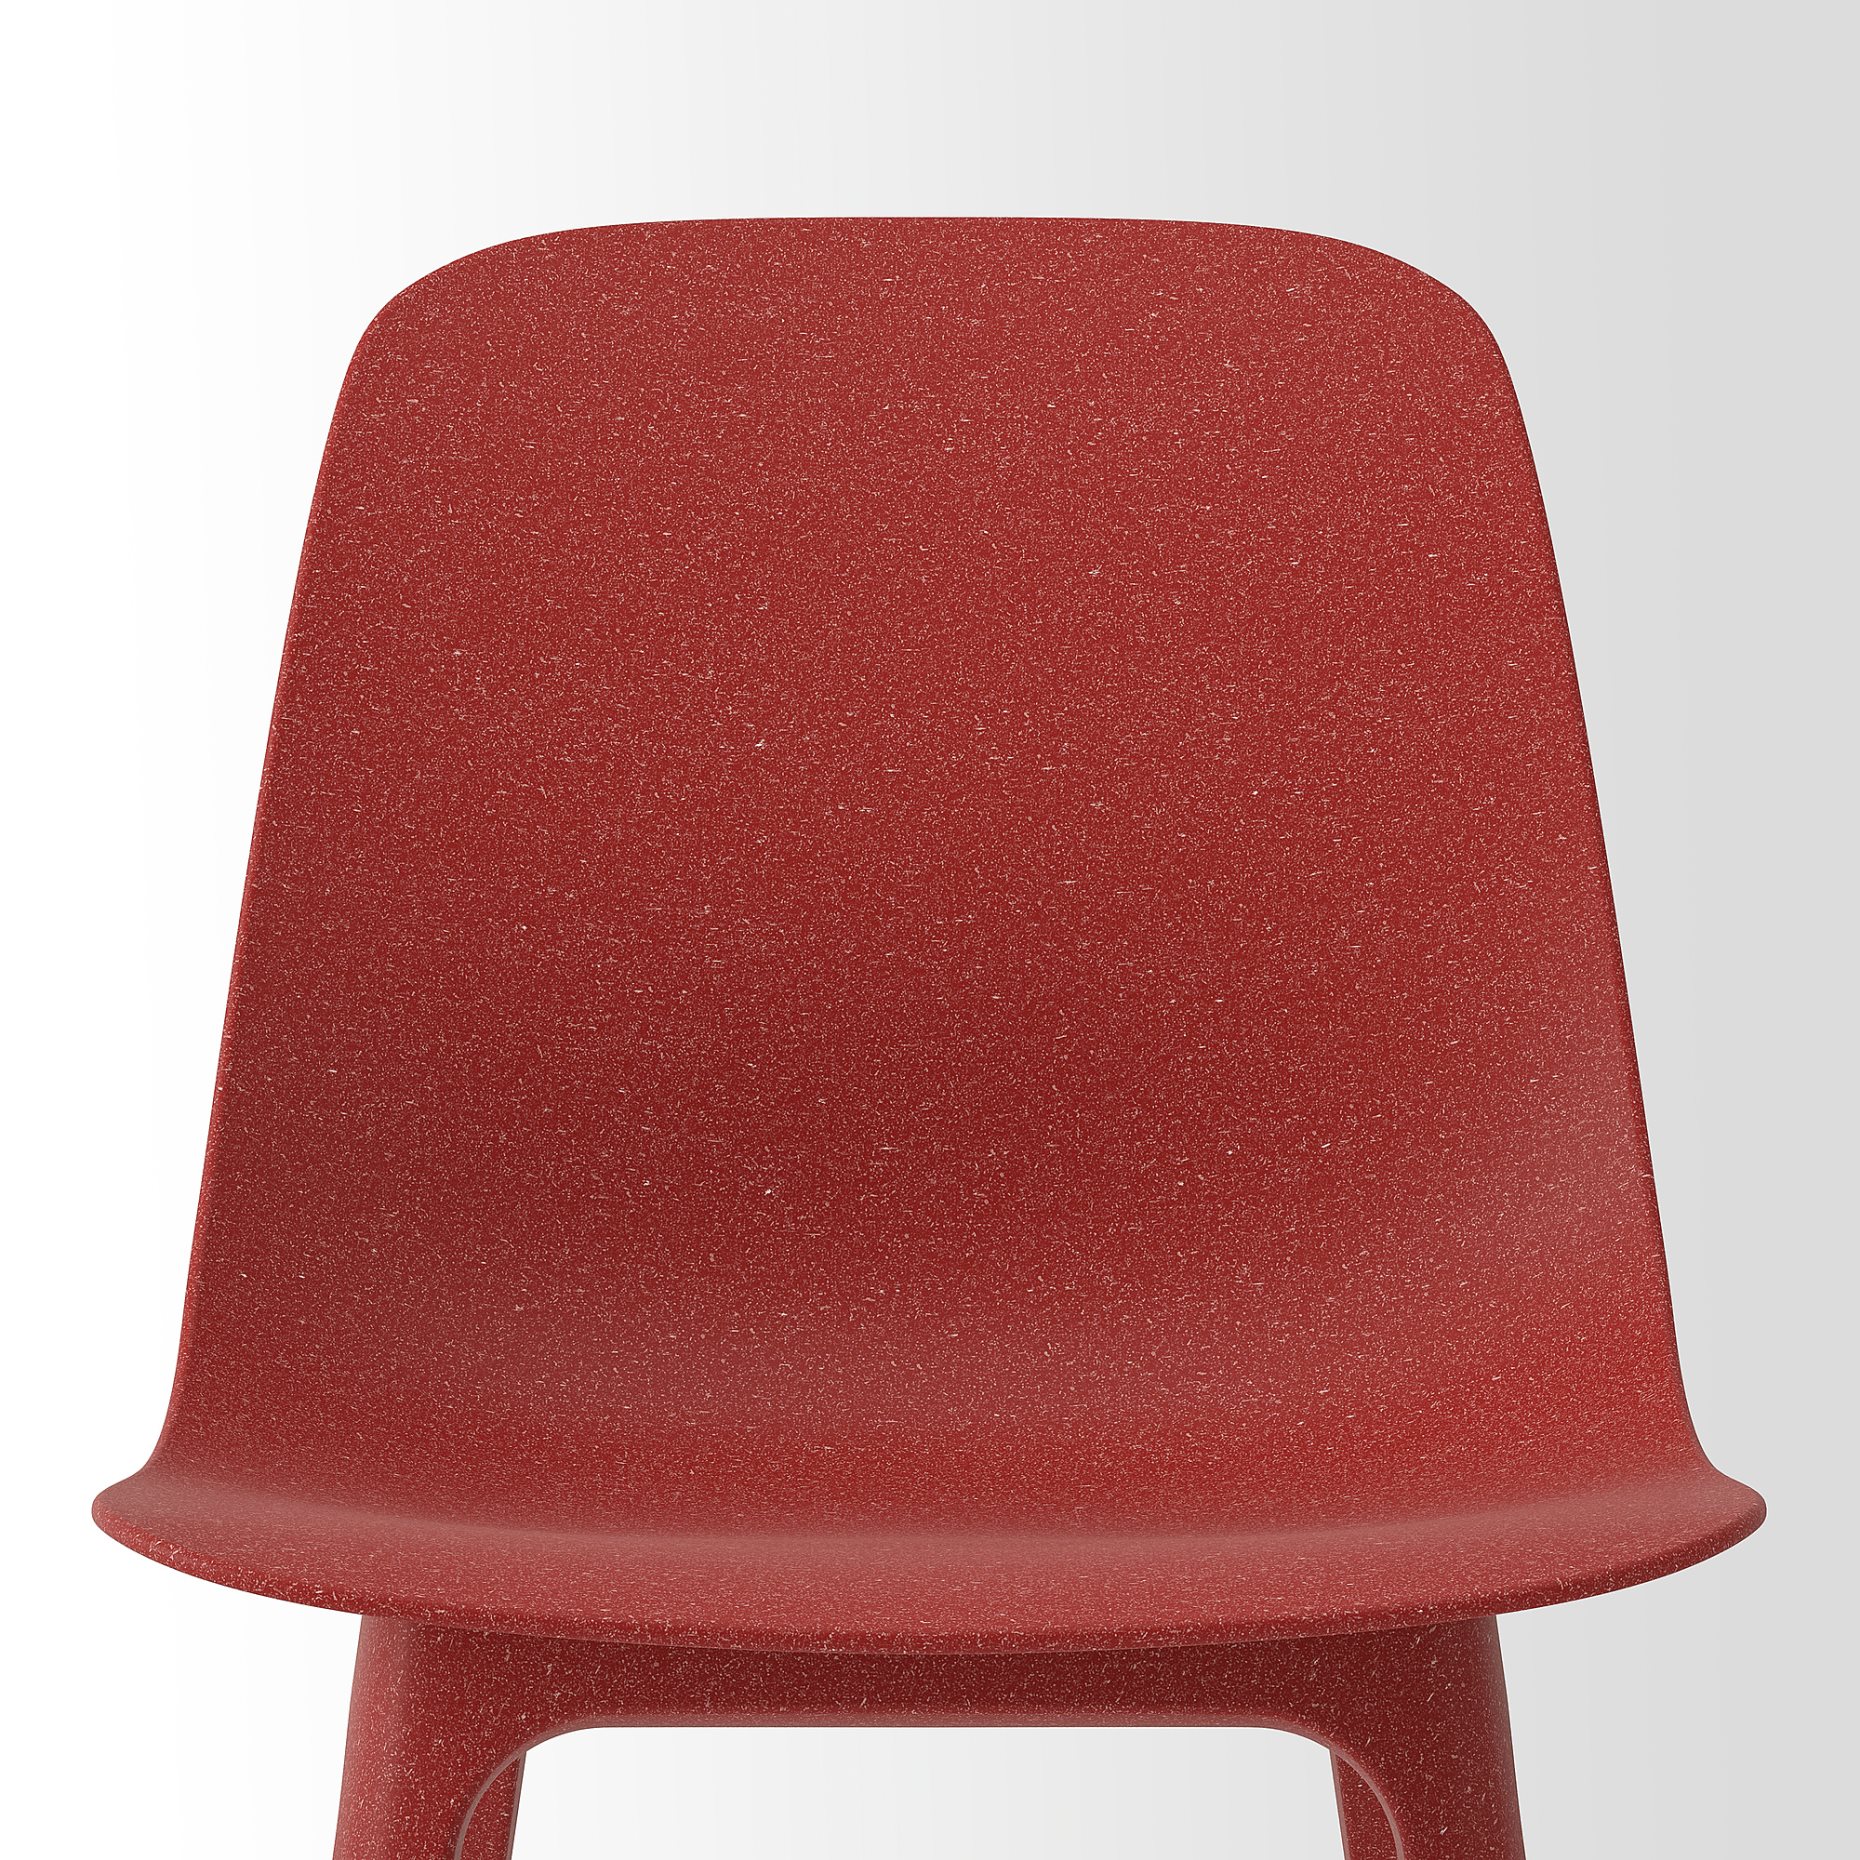 ODGER, chair, 705.165.52